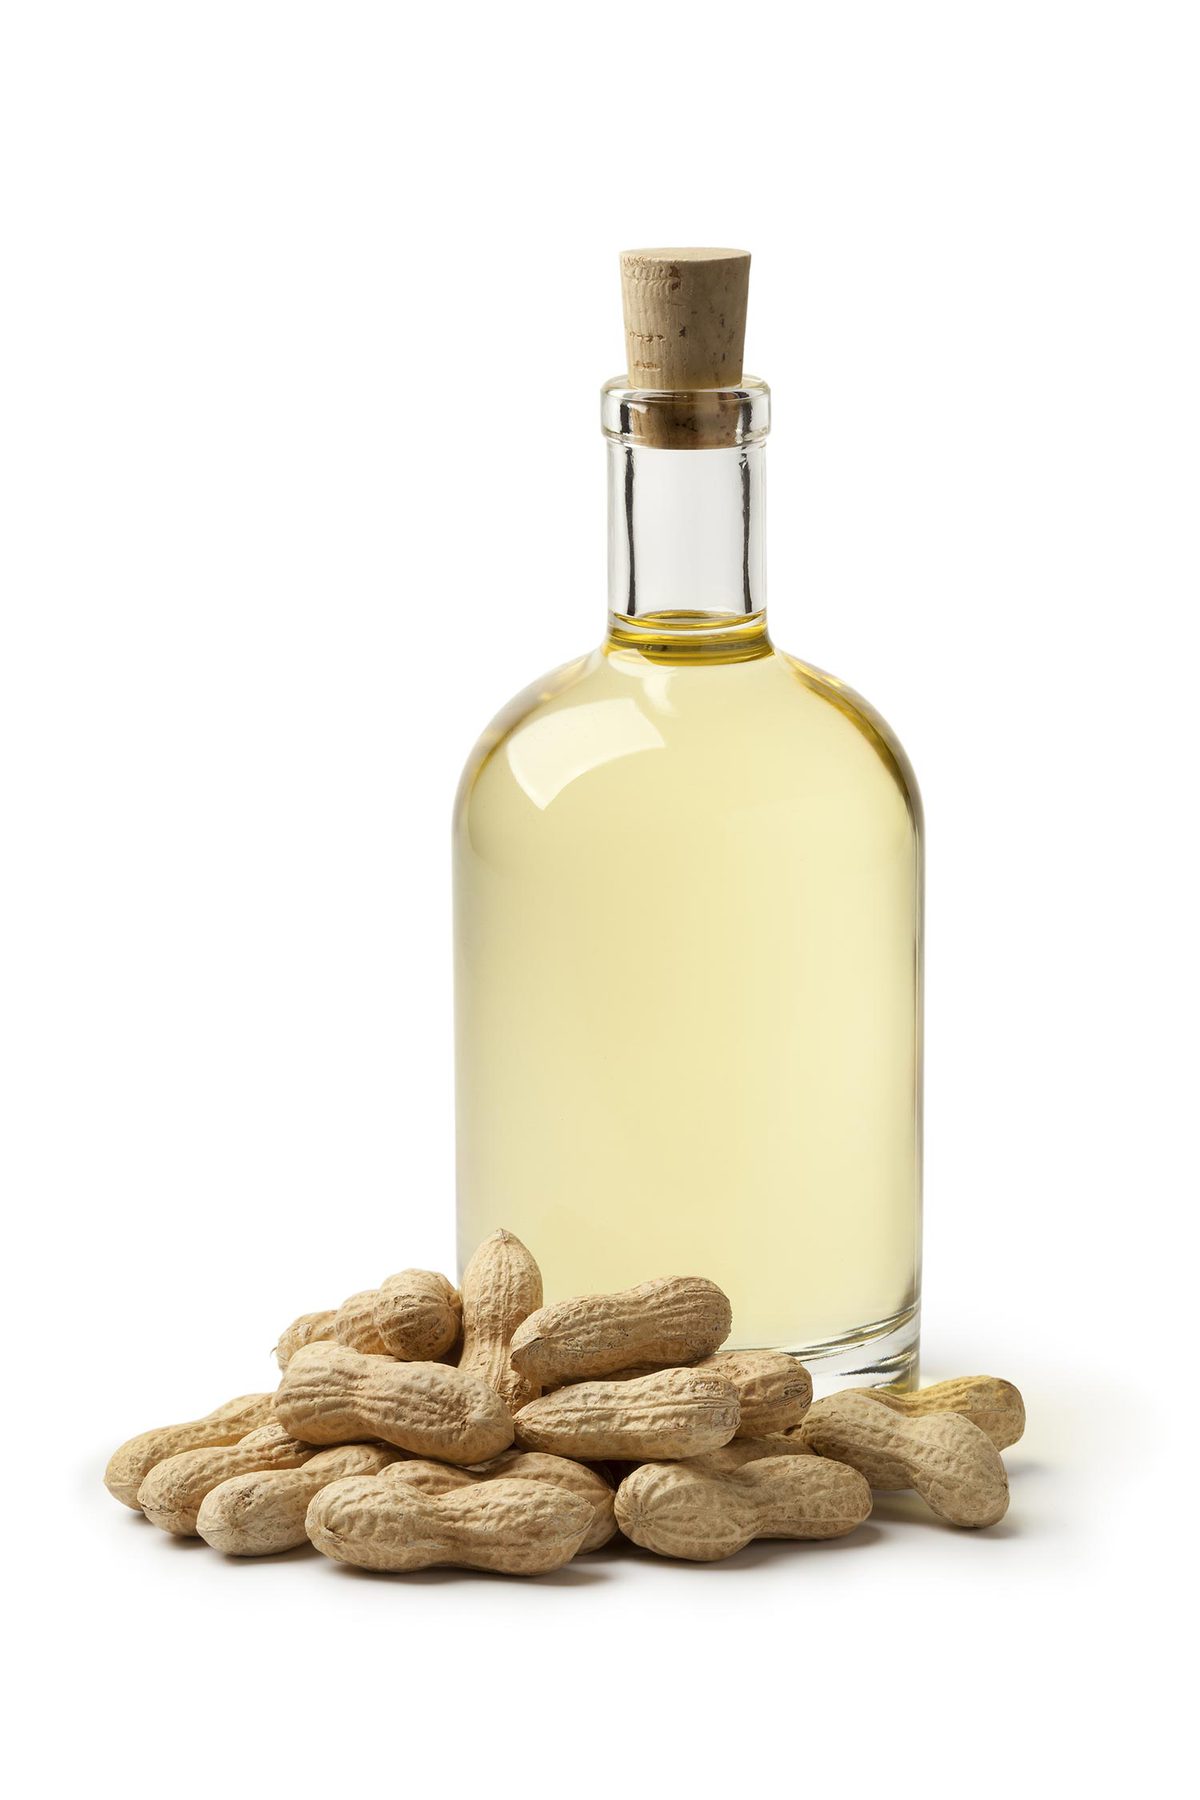 Glass bottle of peanut oil and peanuts